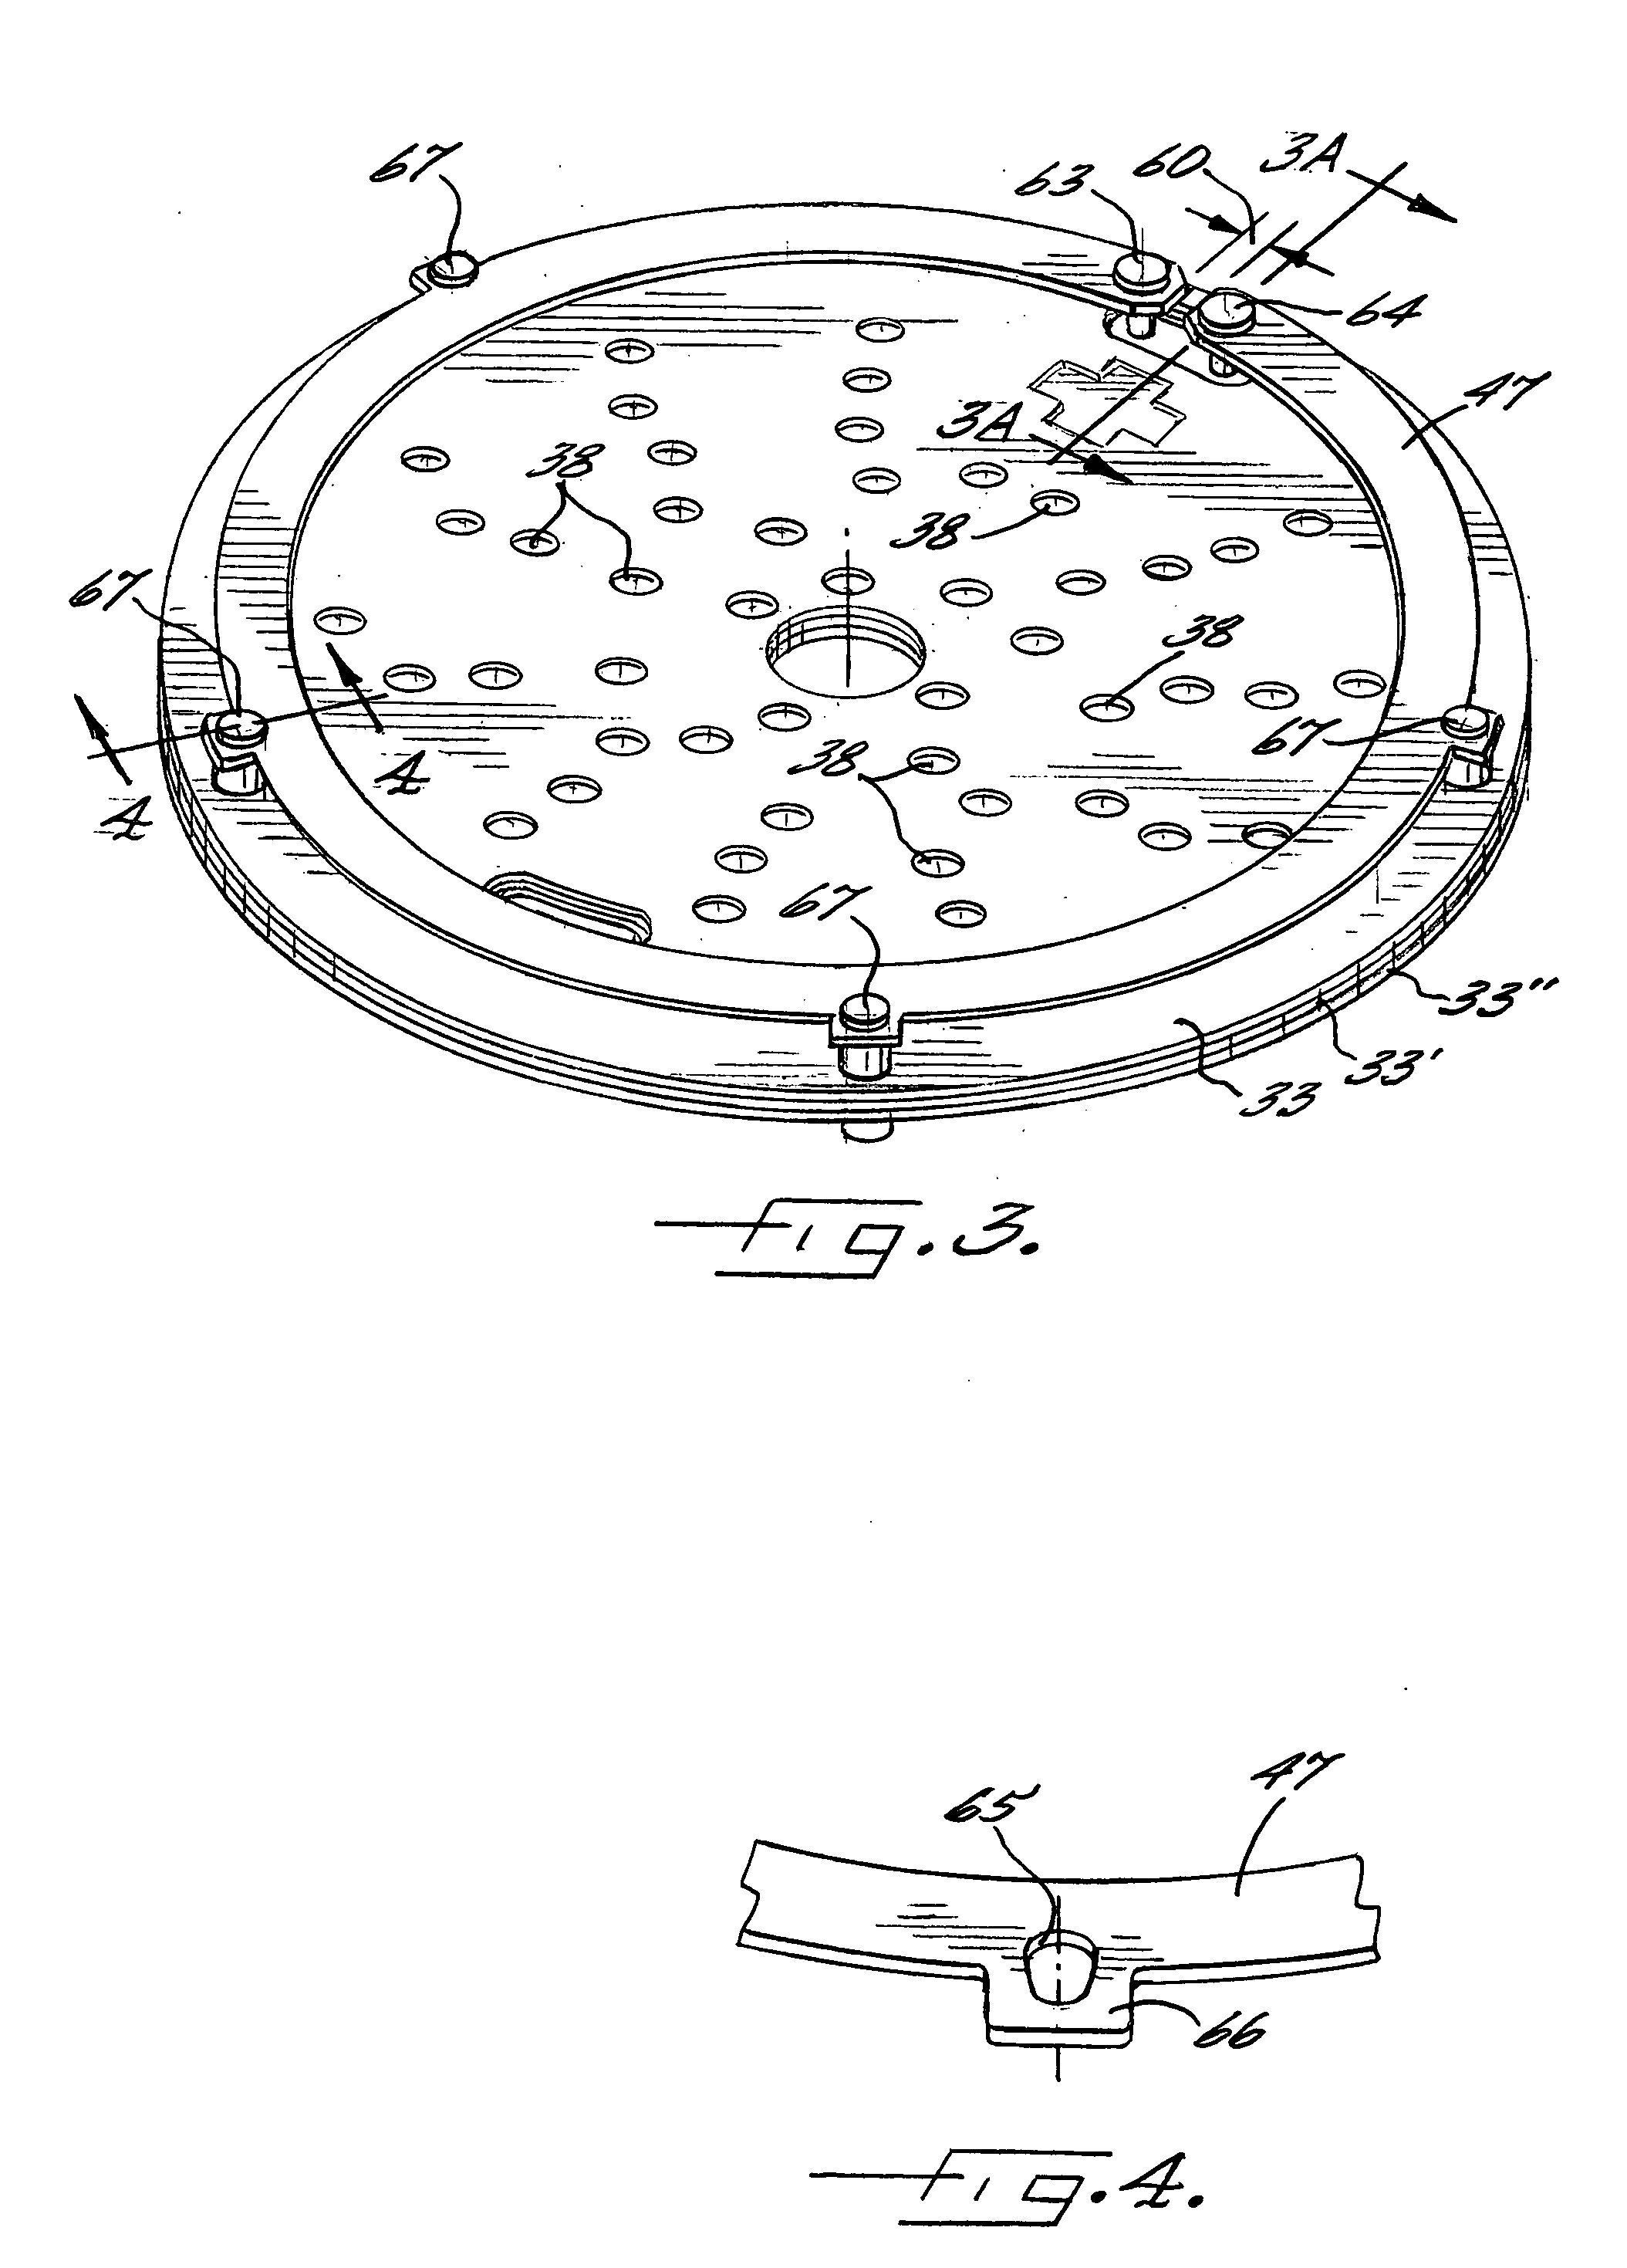 Restricted radiated heating assembly for high temperature processing